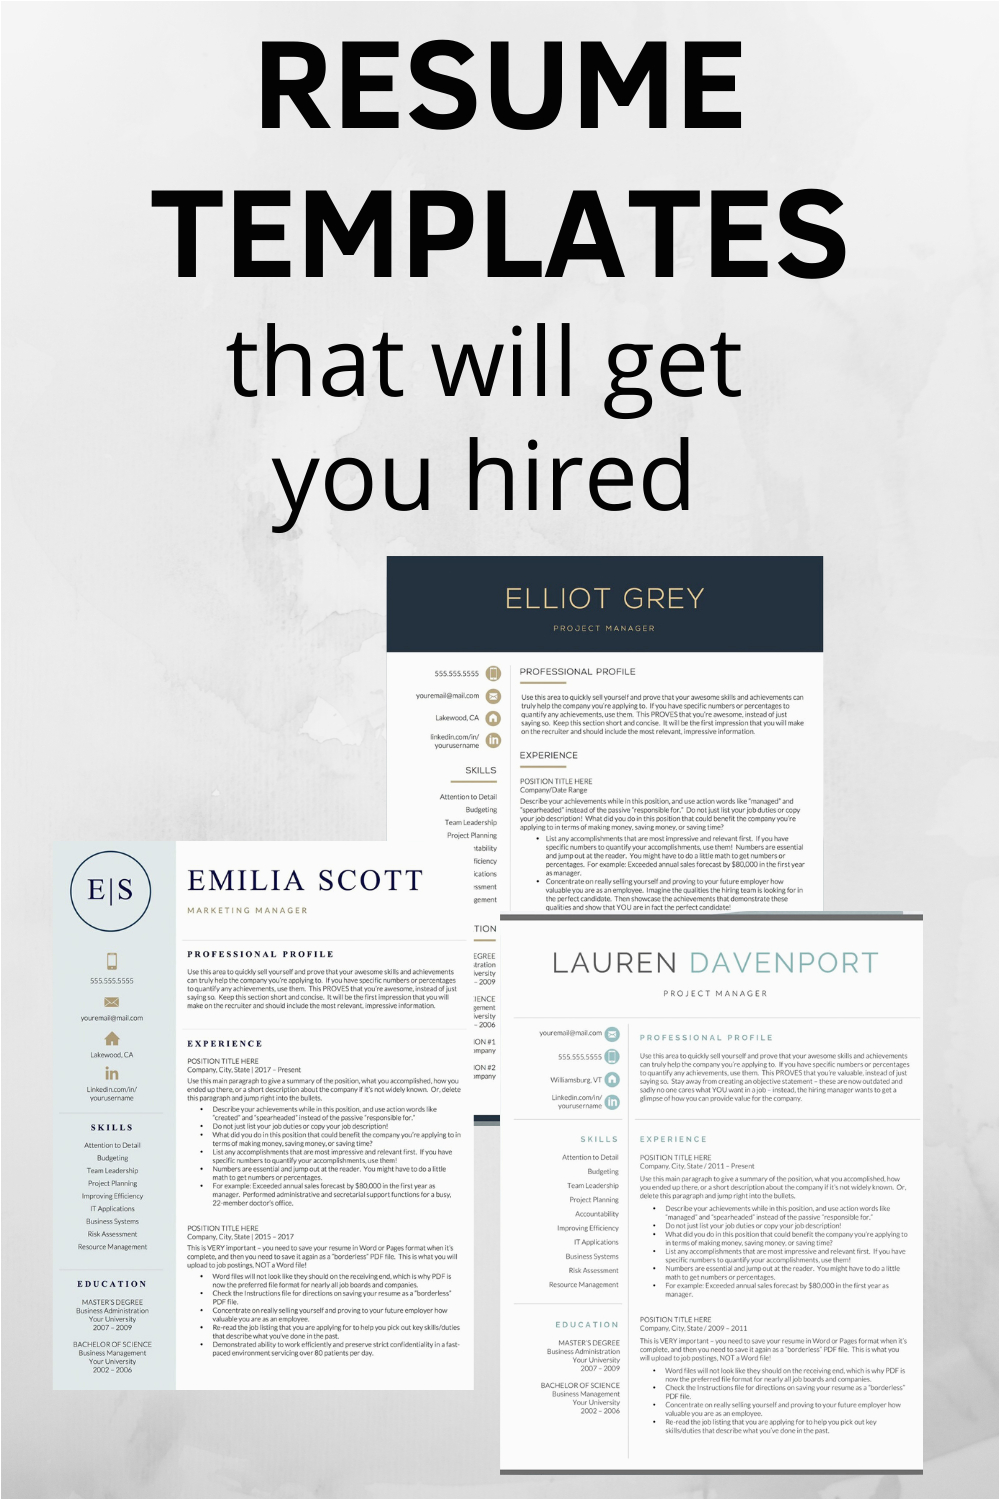 Resume Templates that Get You Hired the Best Resume Examples that Will Get You Hired In 2020